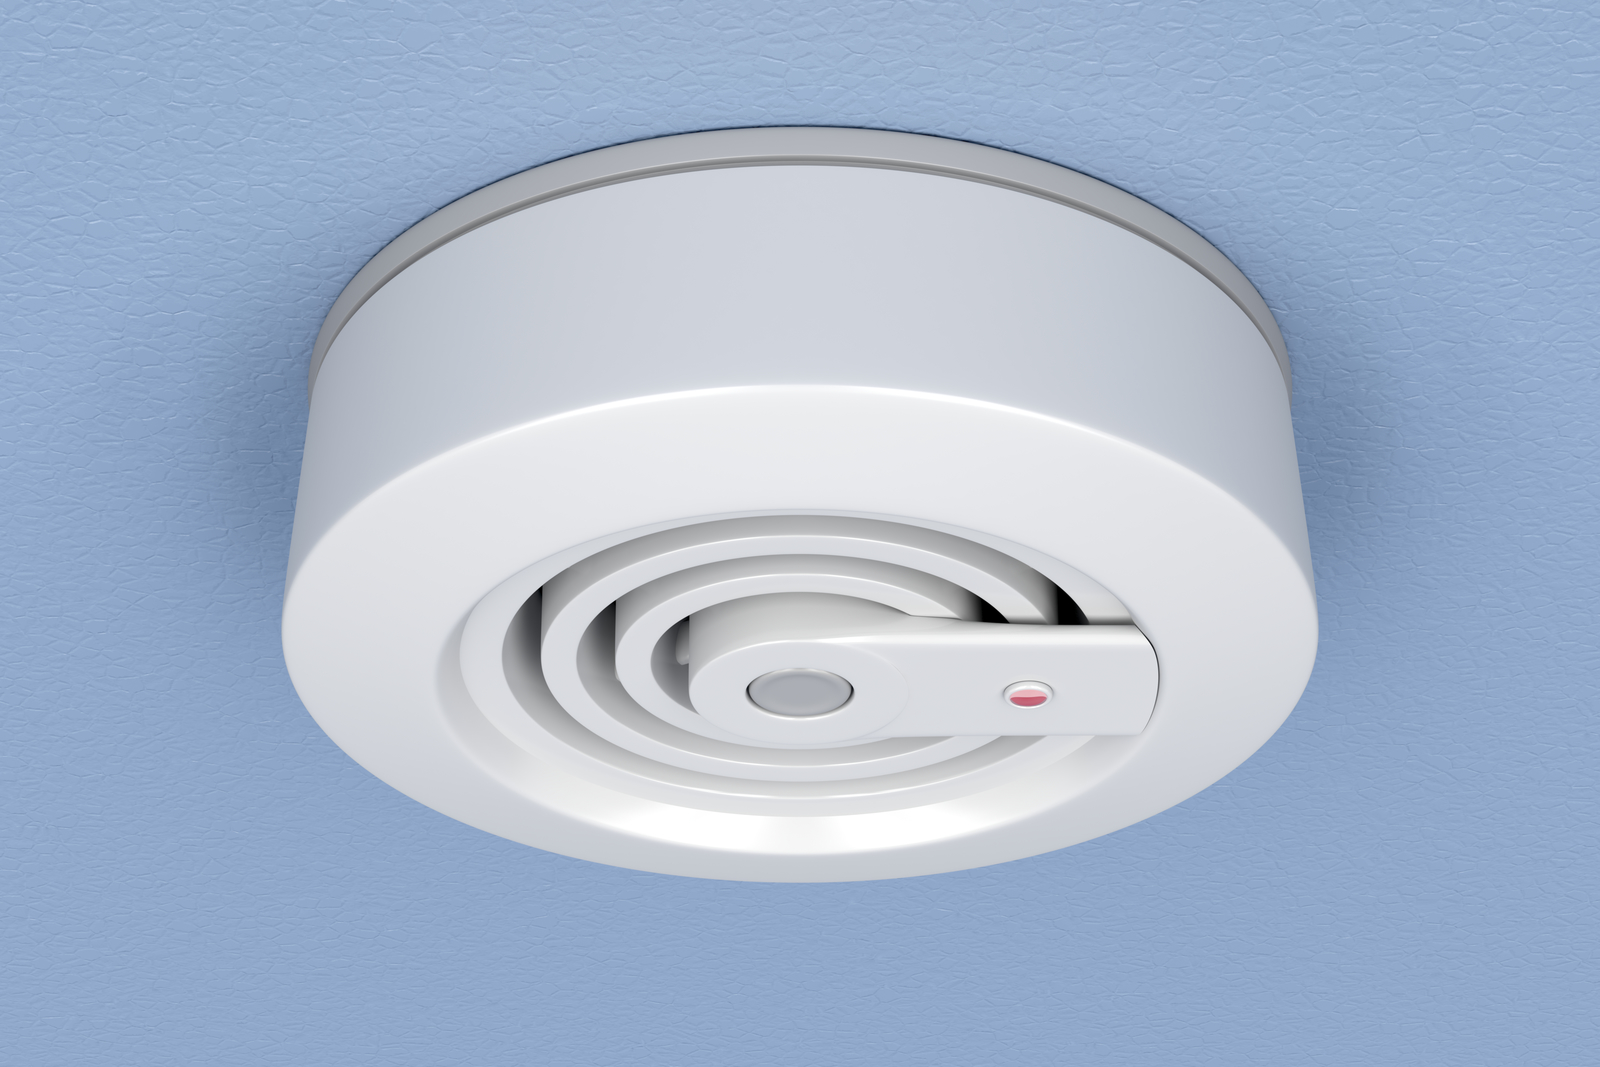 How to Fix a Malfunctioning Smoke Detector